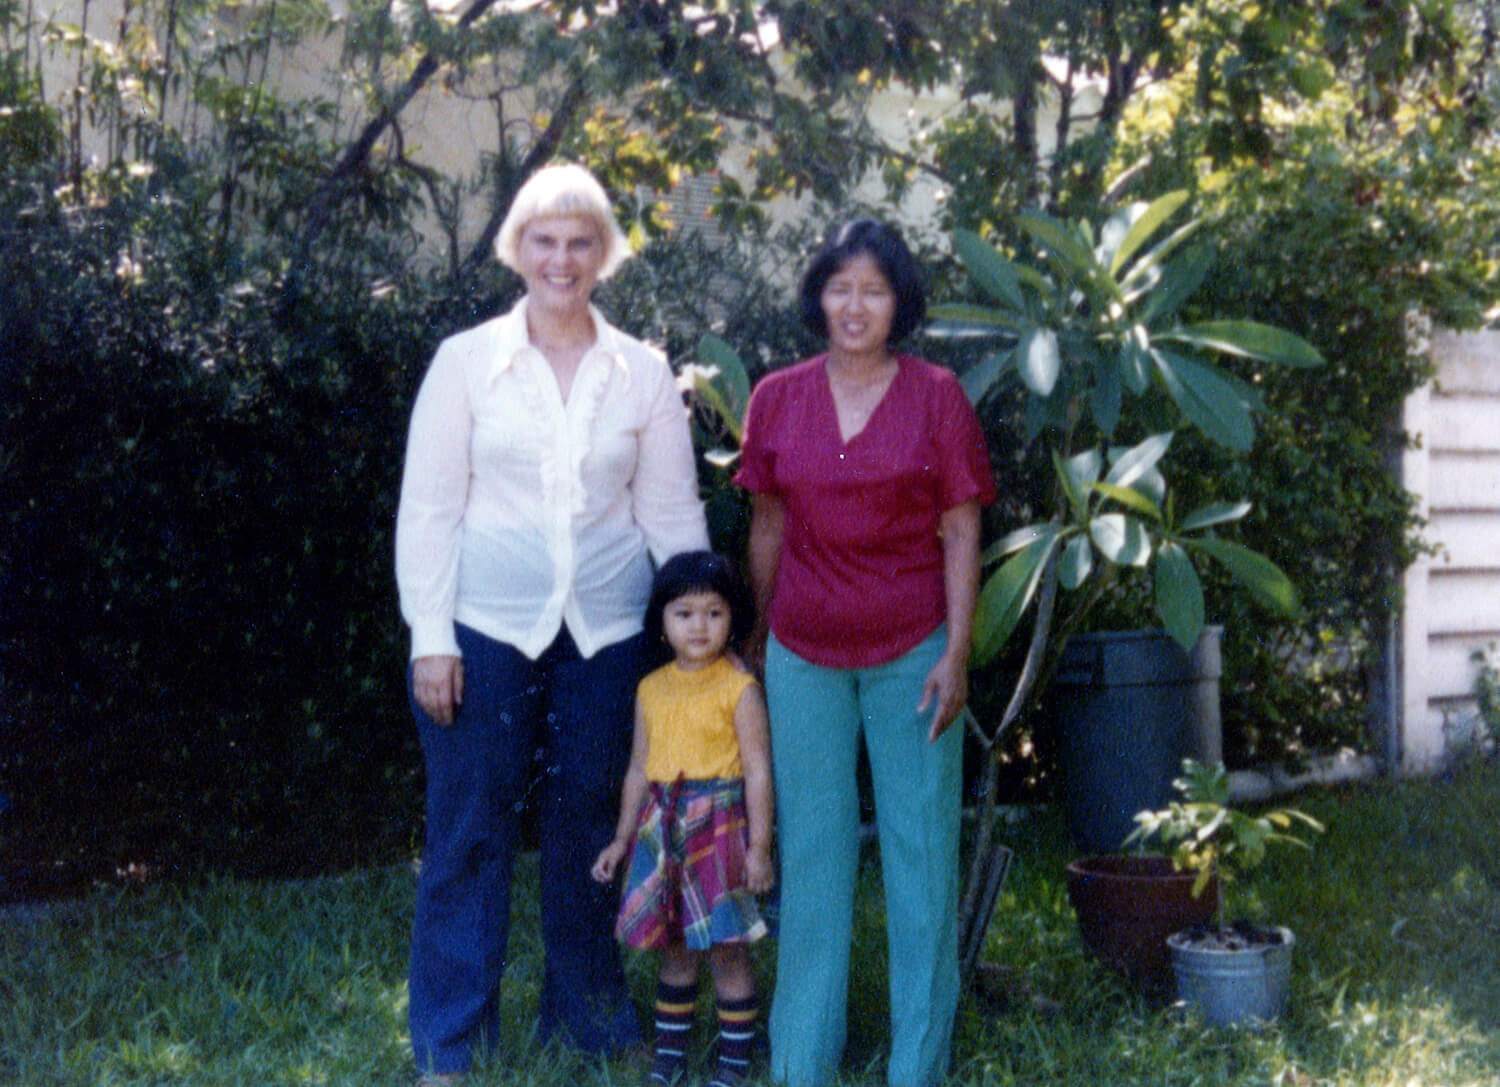 Kathy, Phuong Lien (now Lyn), and Tung in 1980. June 2021